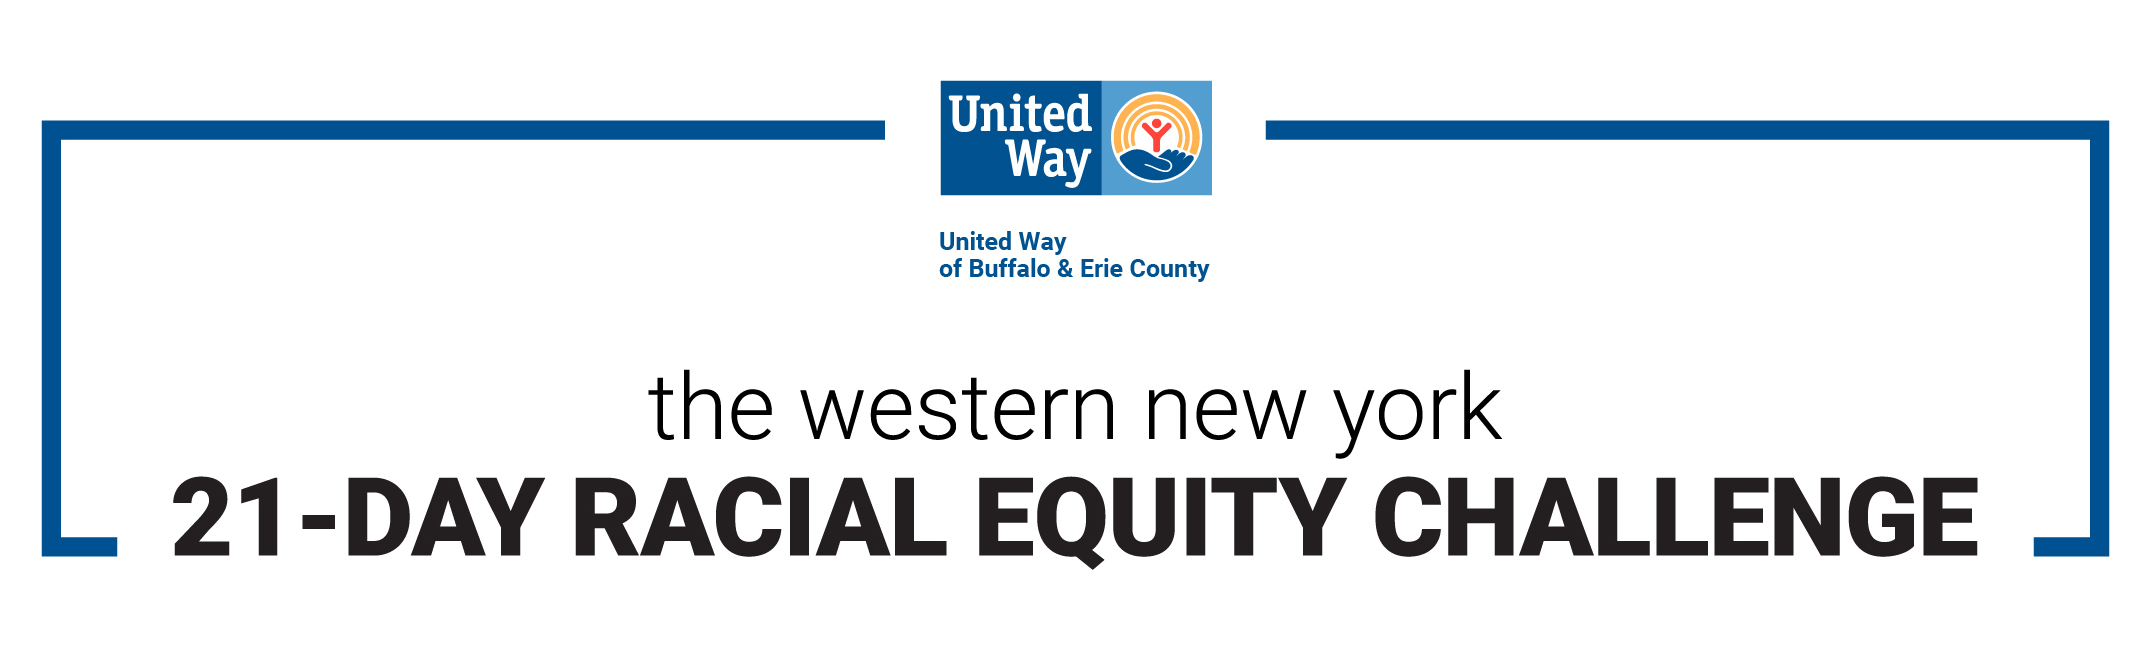 The Western New York 21-Day Racial Equity Challenge Day 6